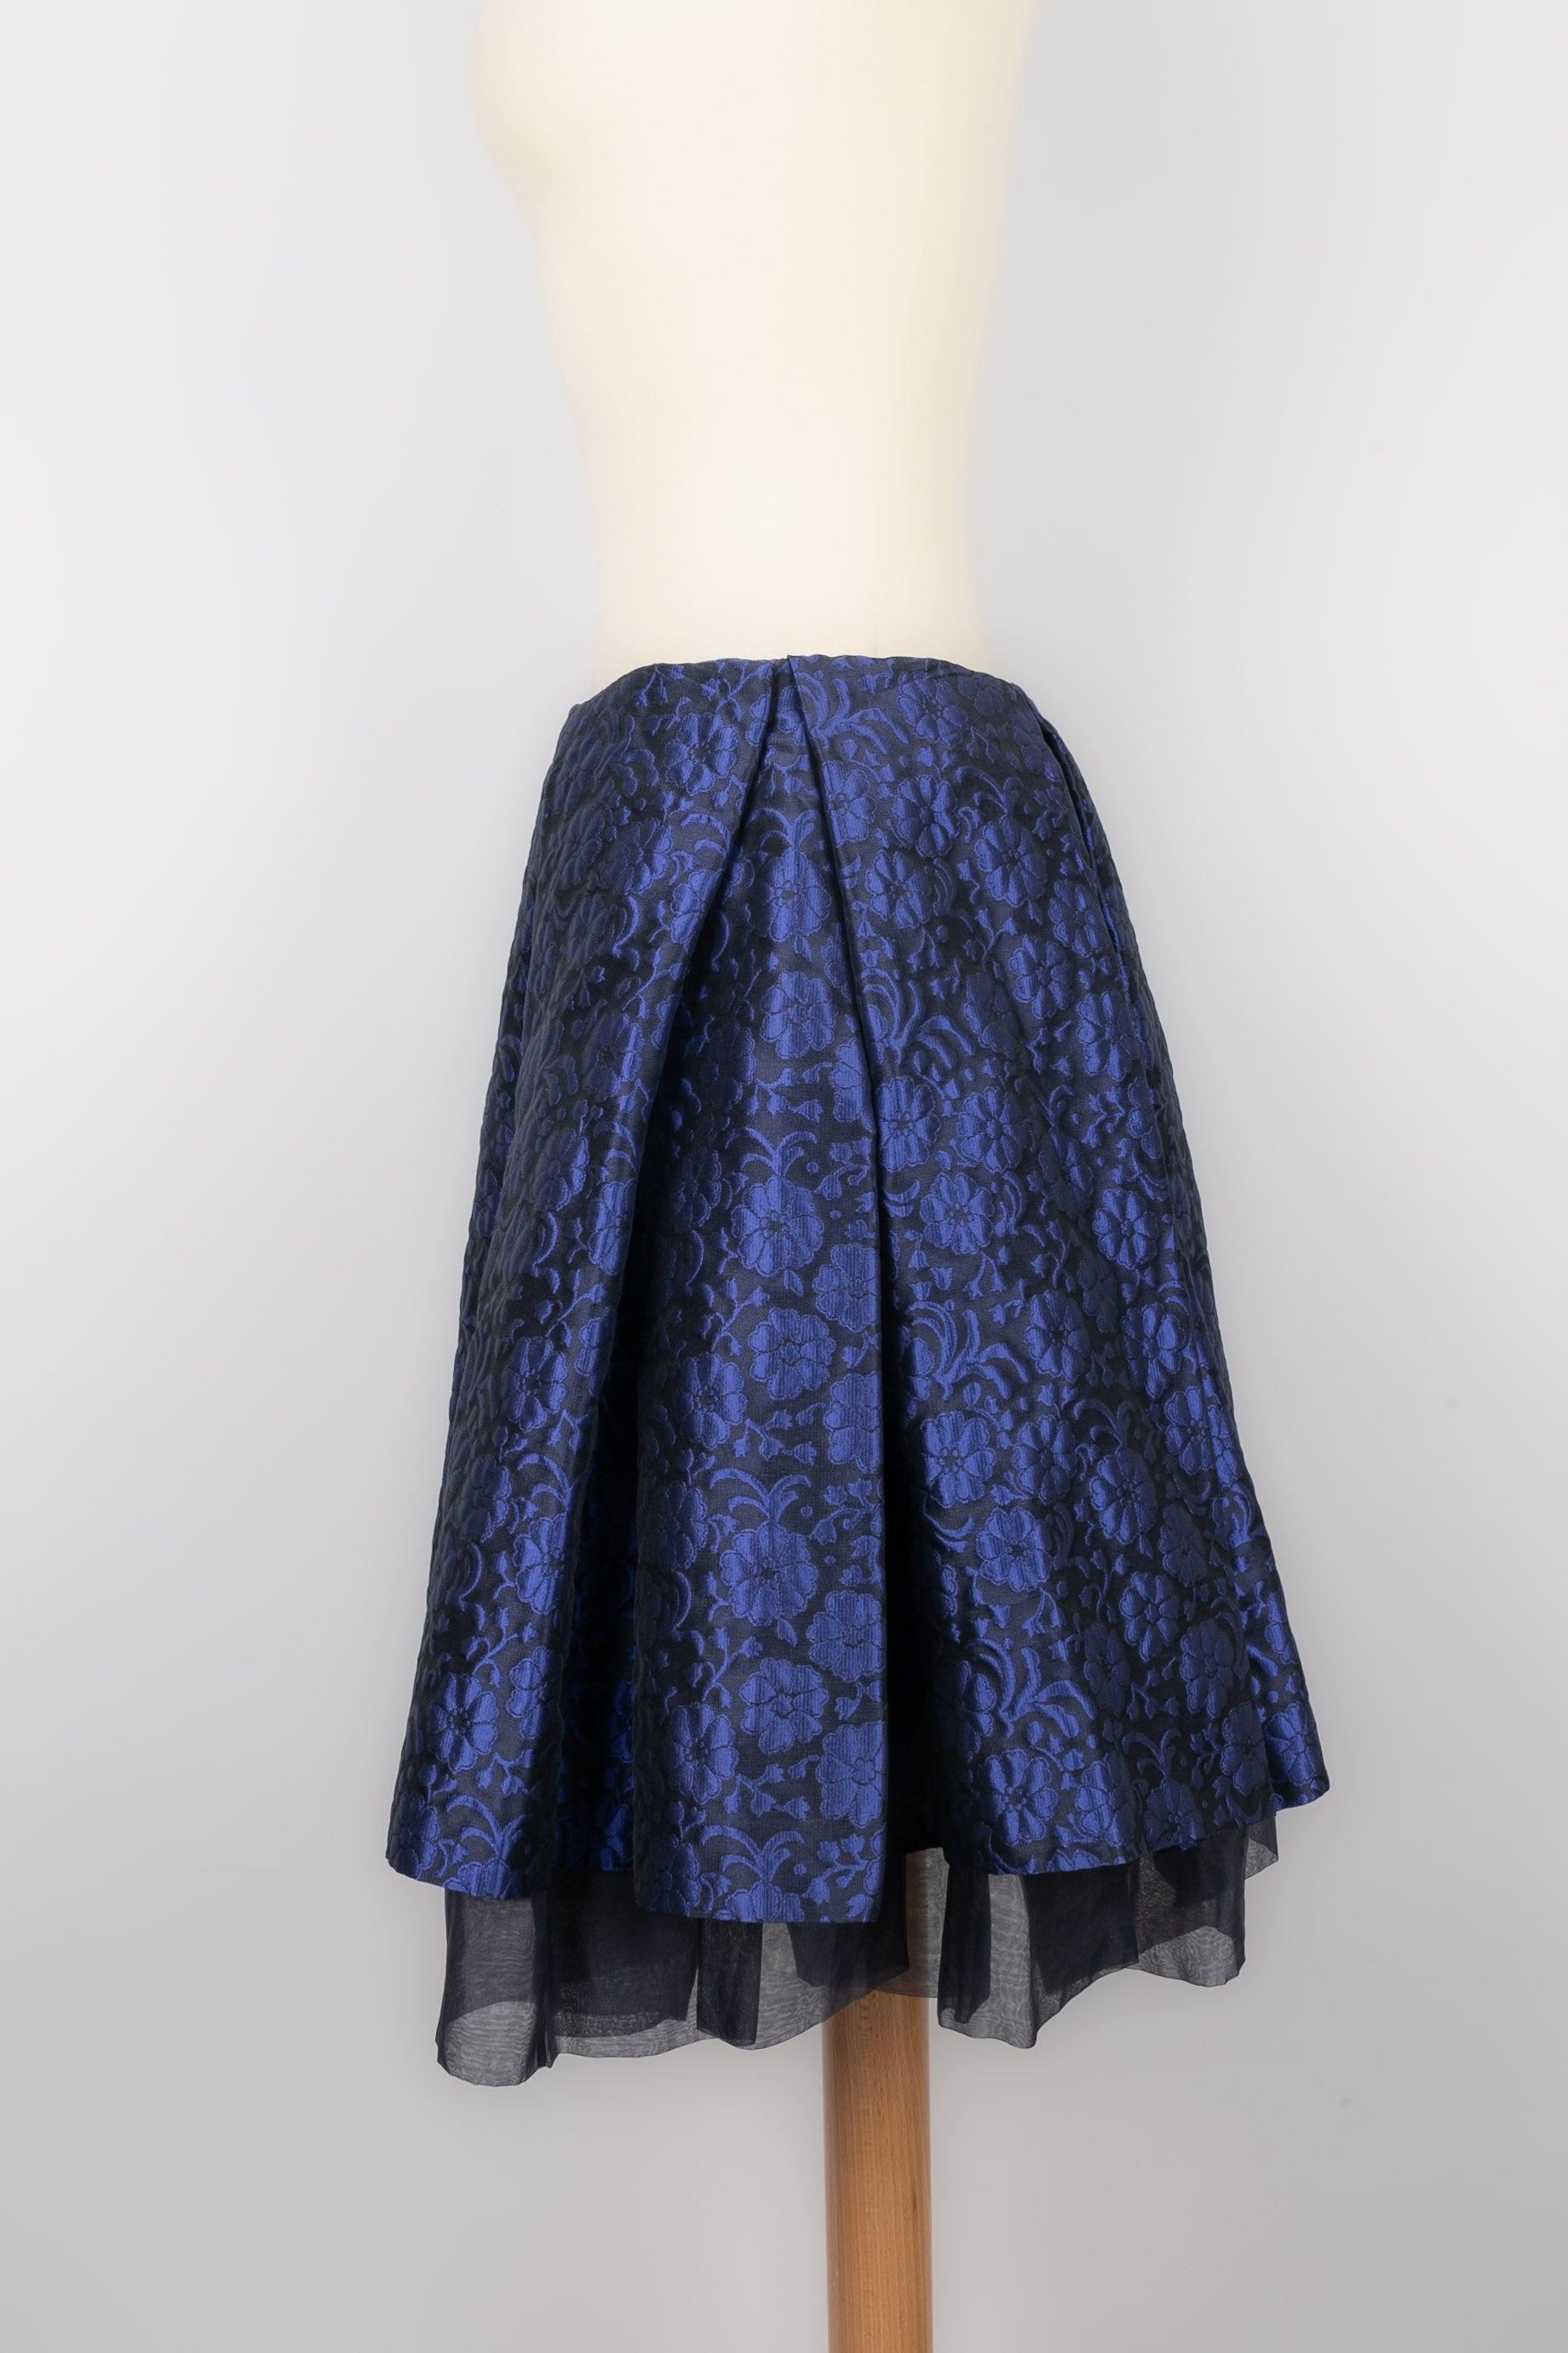 Dior - Gauffering fabric short skirt with a silk lining. No size nor composition label, it fits a 38FR.

Additional information:
Condition: Very good condition
Dimensions: Waist: 35 cm - Length: from 44 cm to 53 cm

Seller Reference: FJ85
